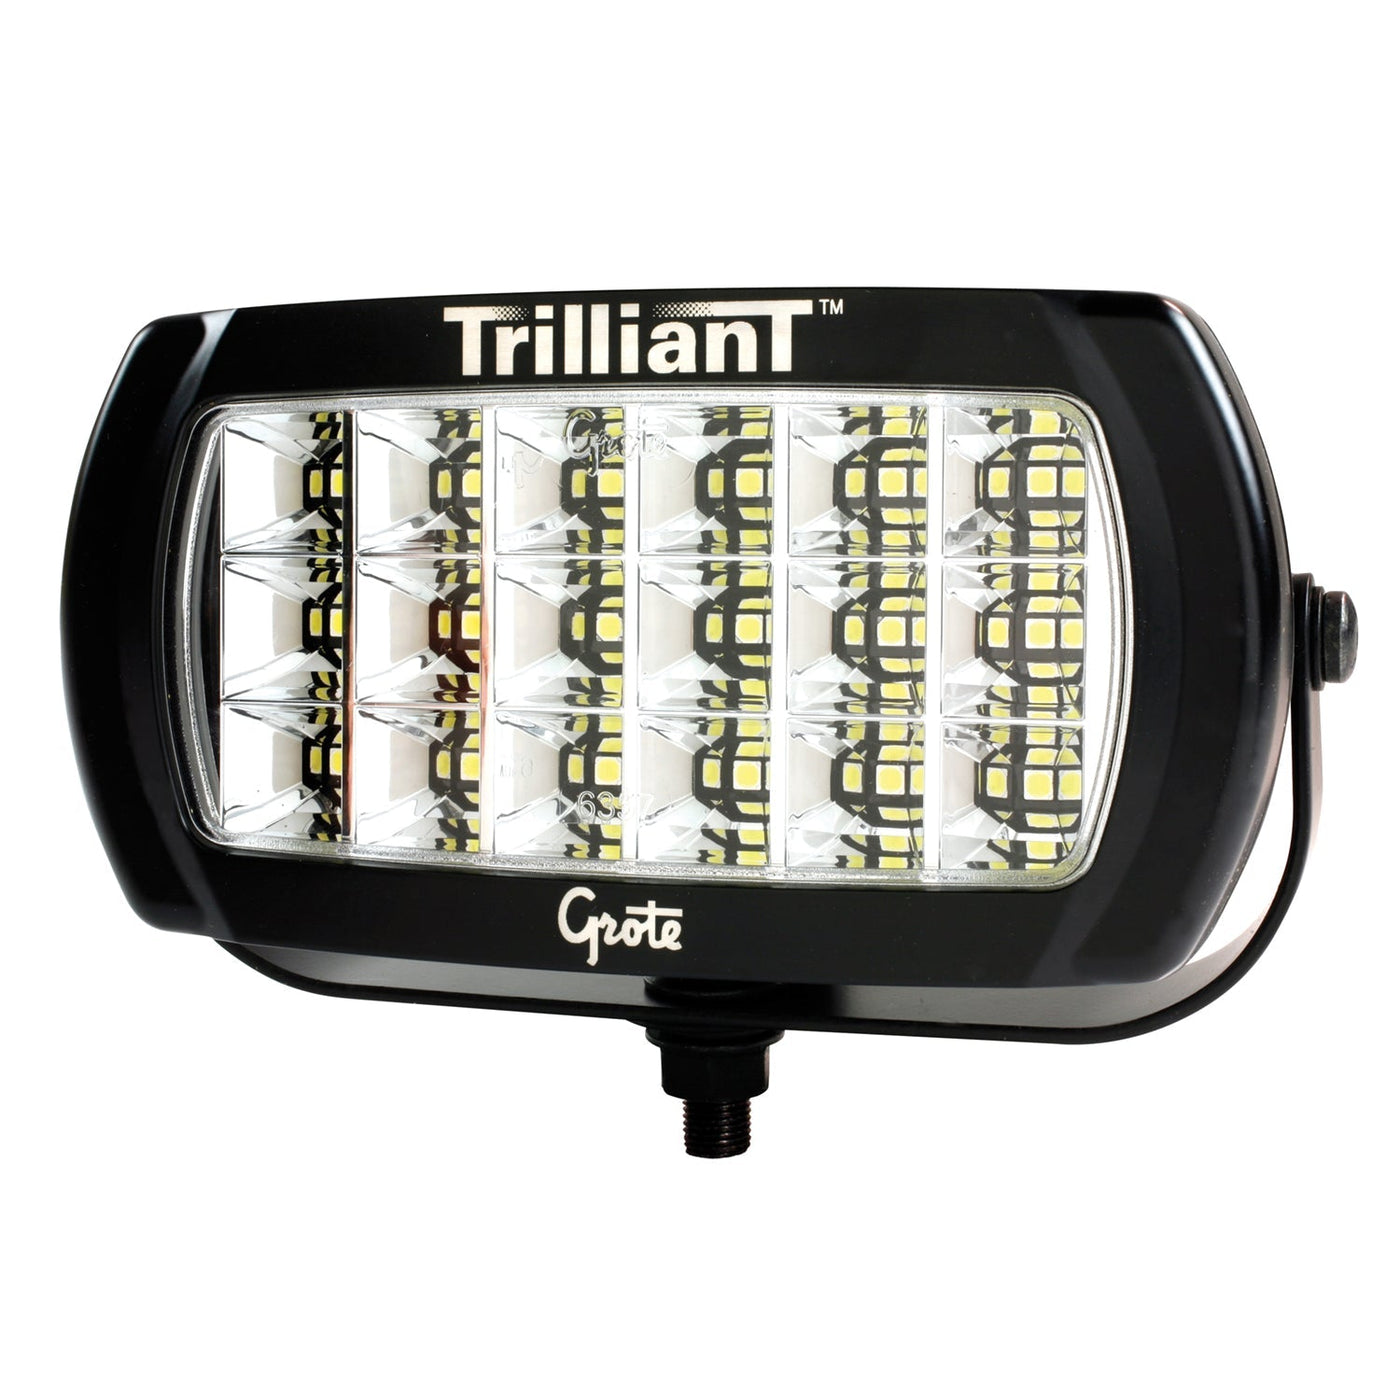 - LED Lighting, Grote W/Reflector Grote Lamp, - 089373150680 Work Trilliant Flood Pattern, Forward